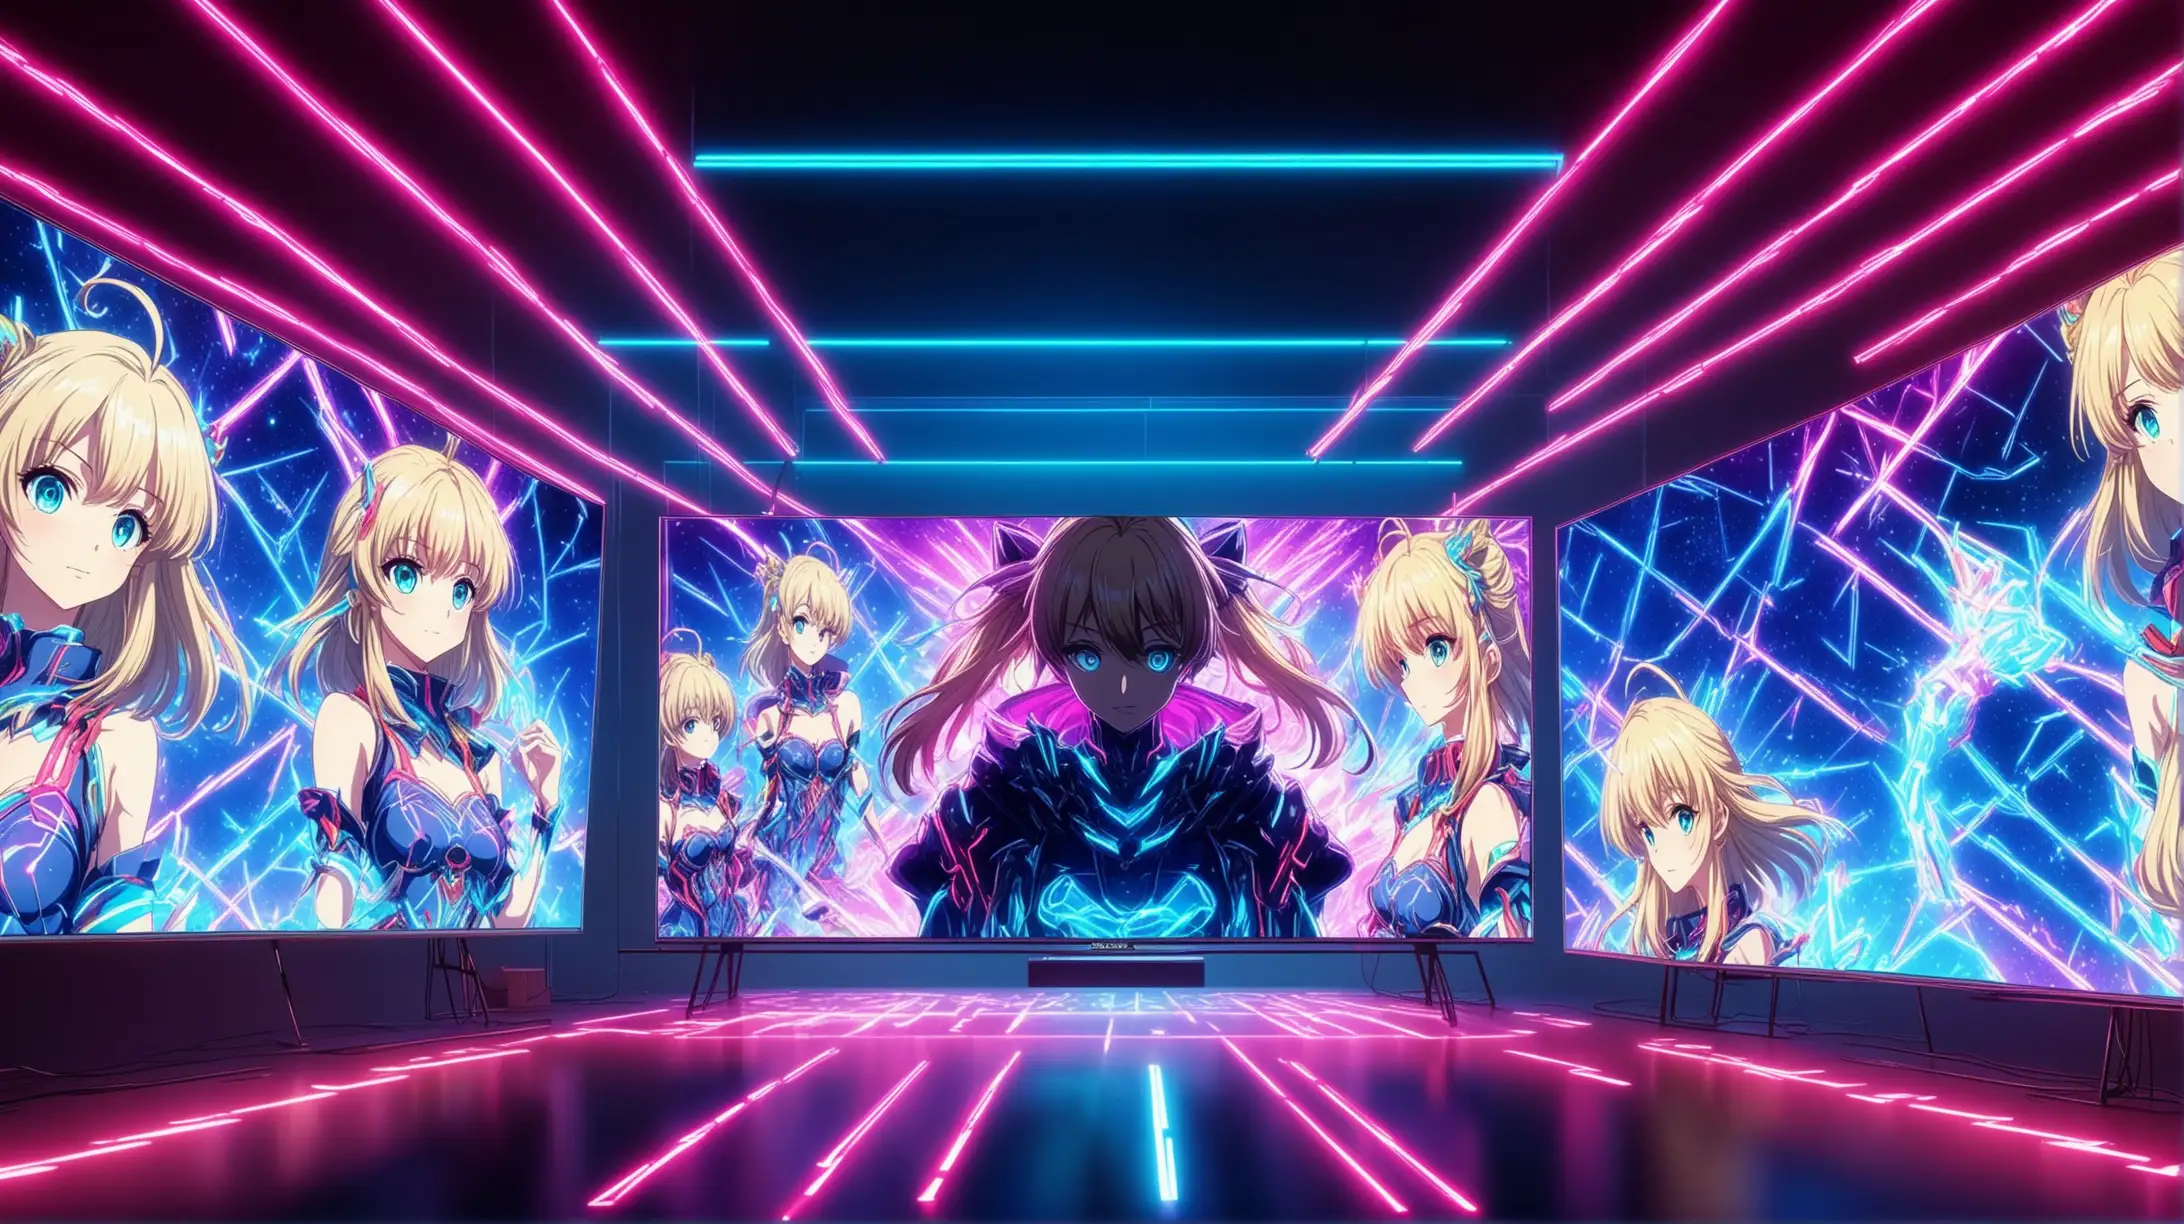 most awaited anime with  8K resolution, neon